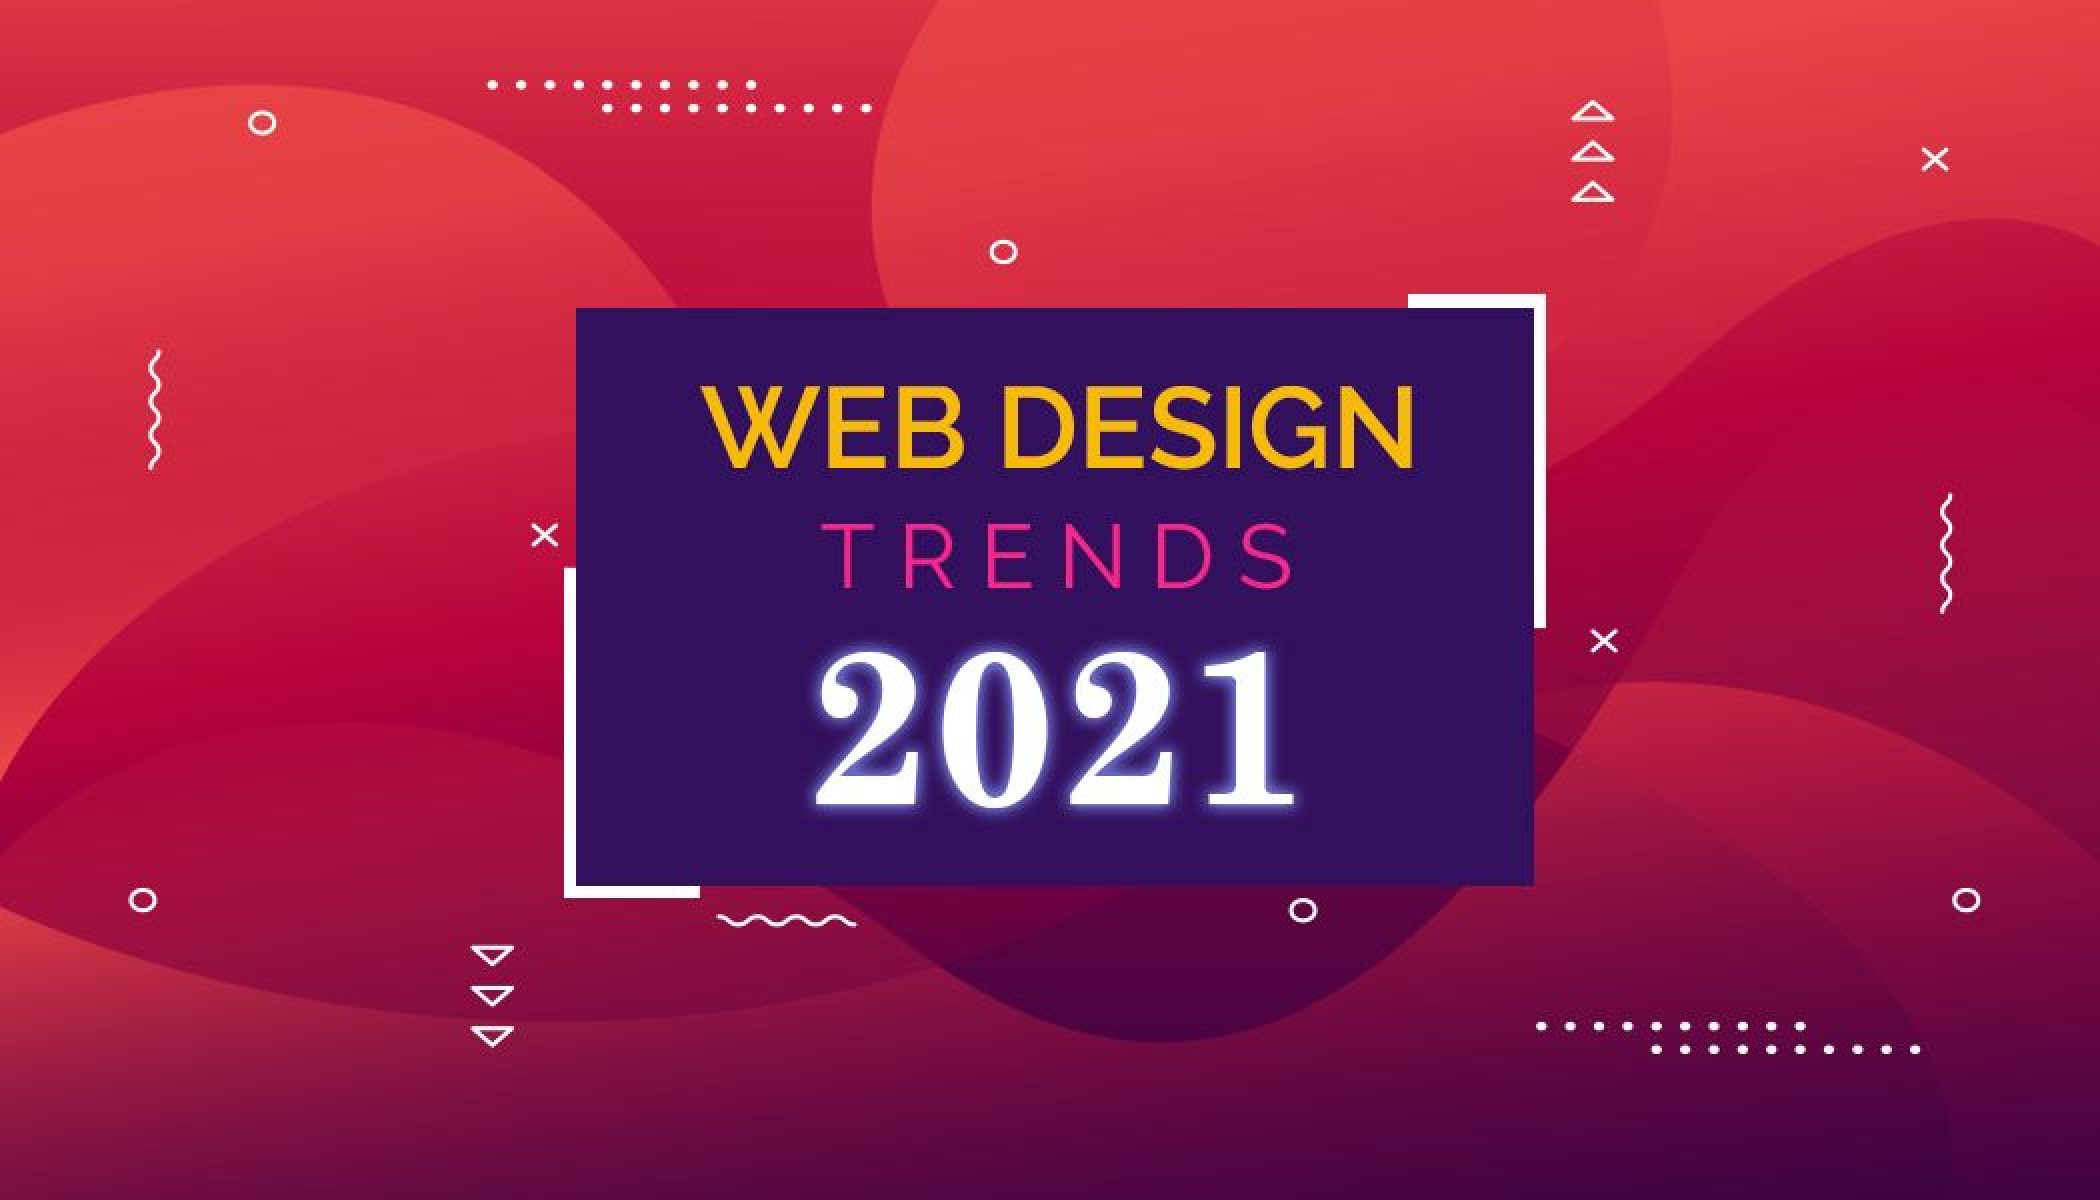 The Latest Web Design Trends for 2021 and Beyond